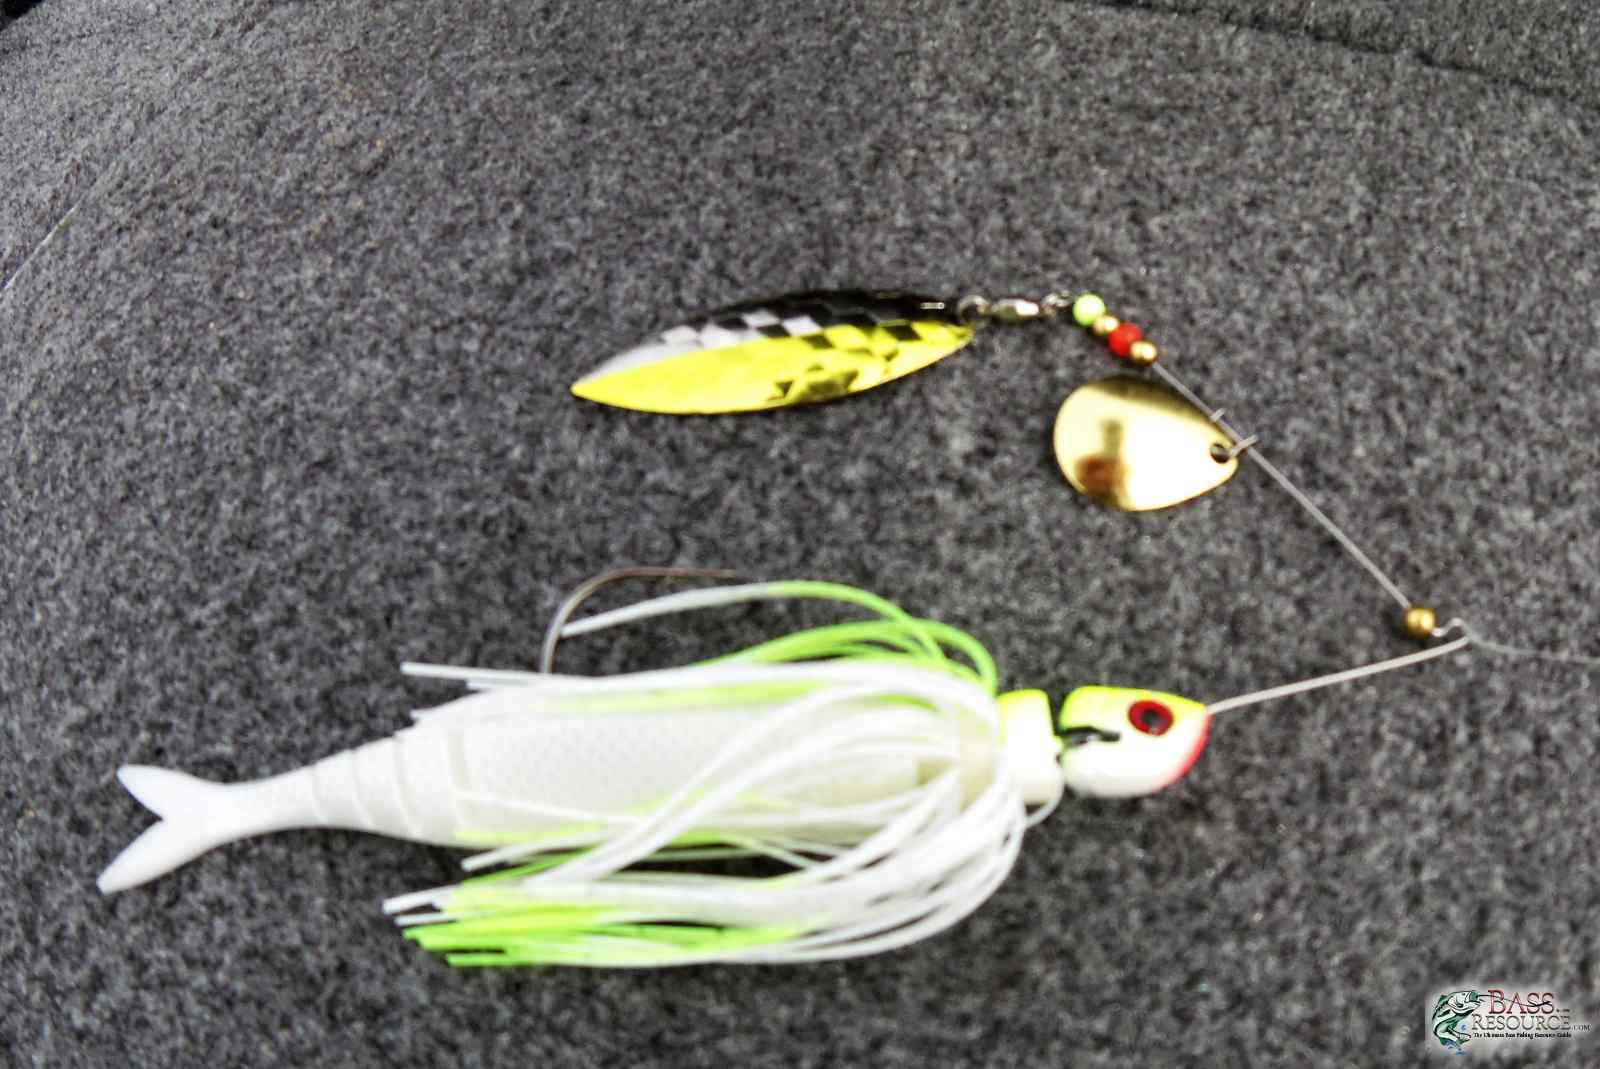 A trailer on a spinnerbait or not? - Fishing Tackle - Bass Fishing